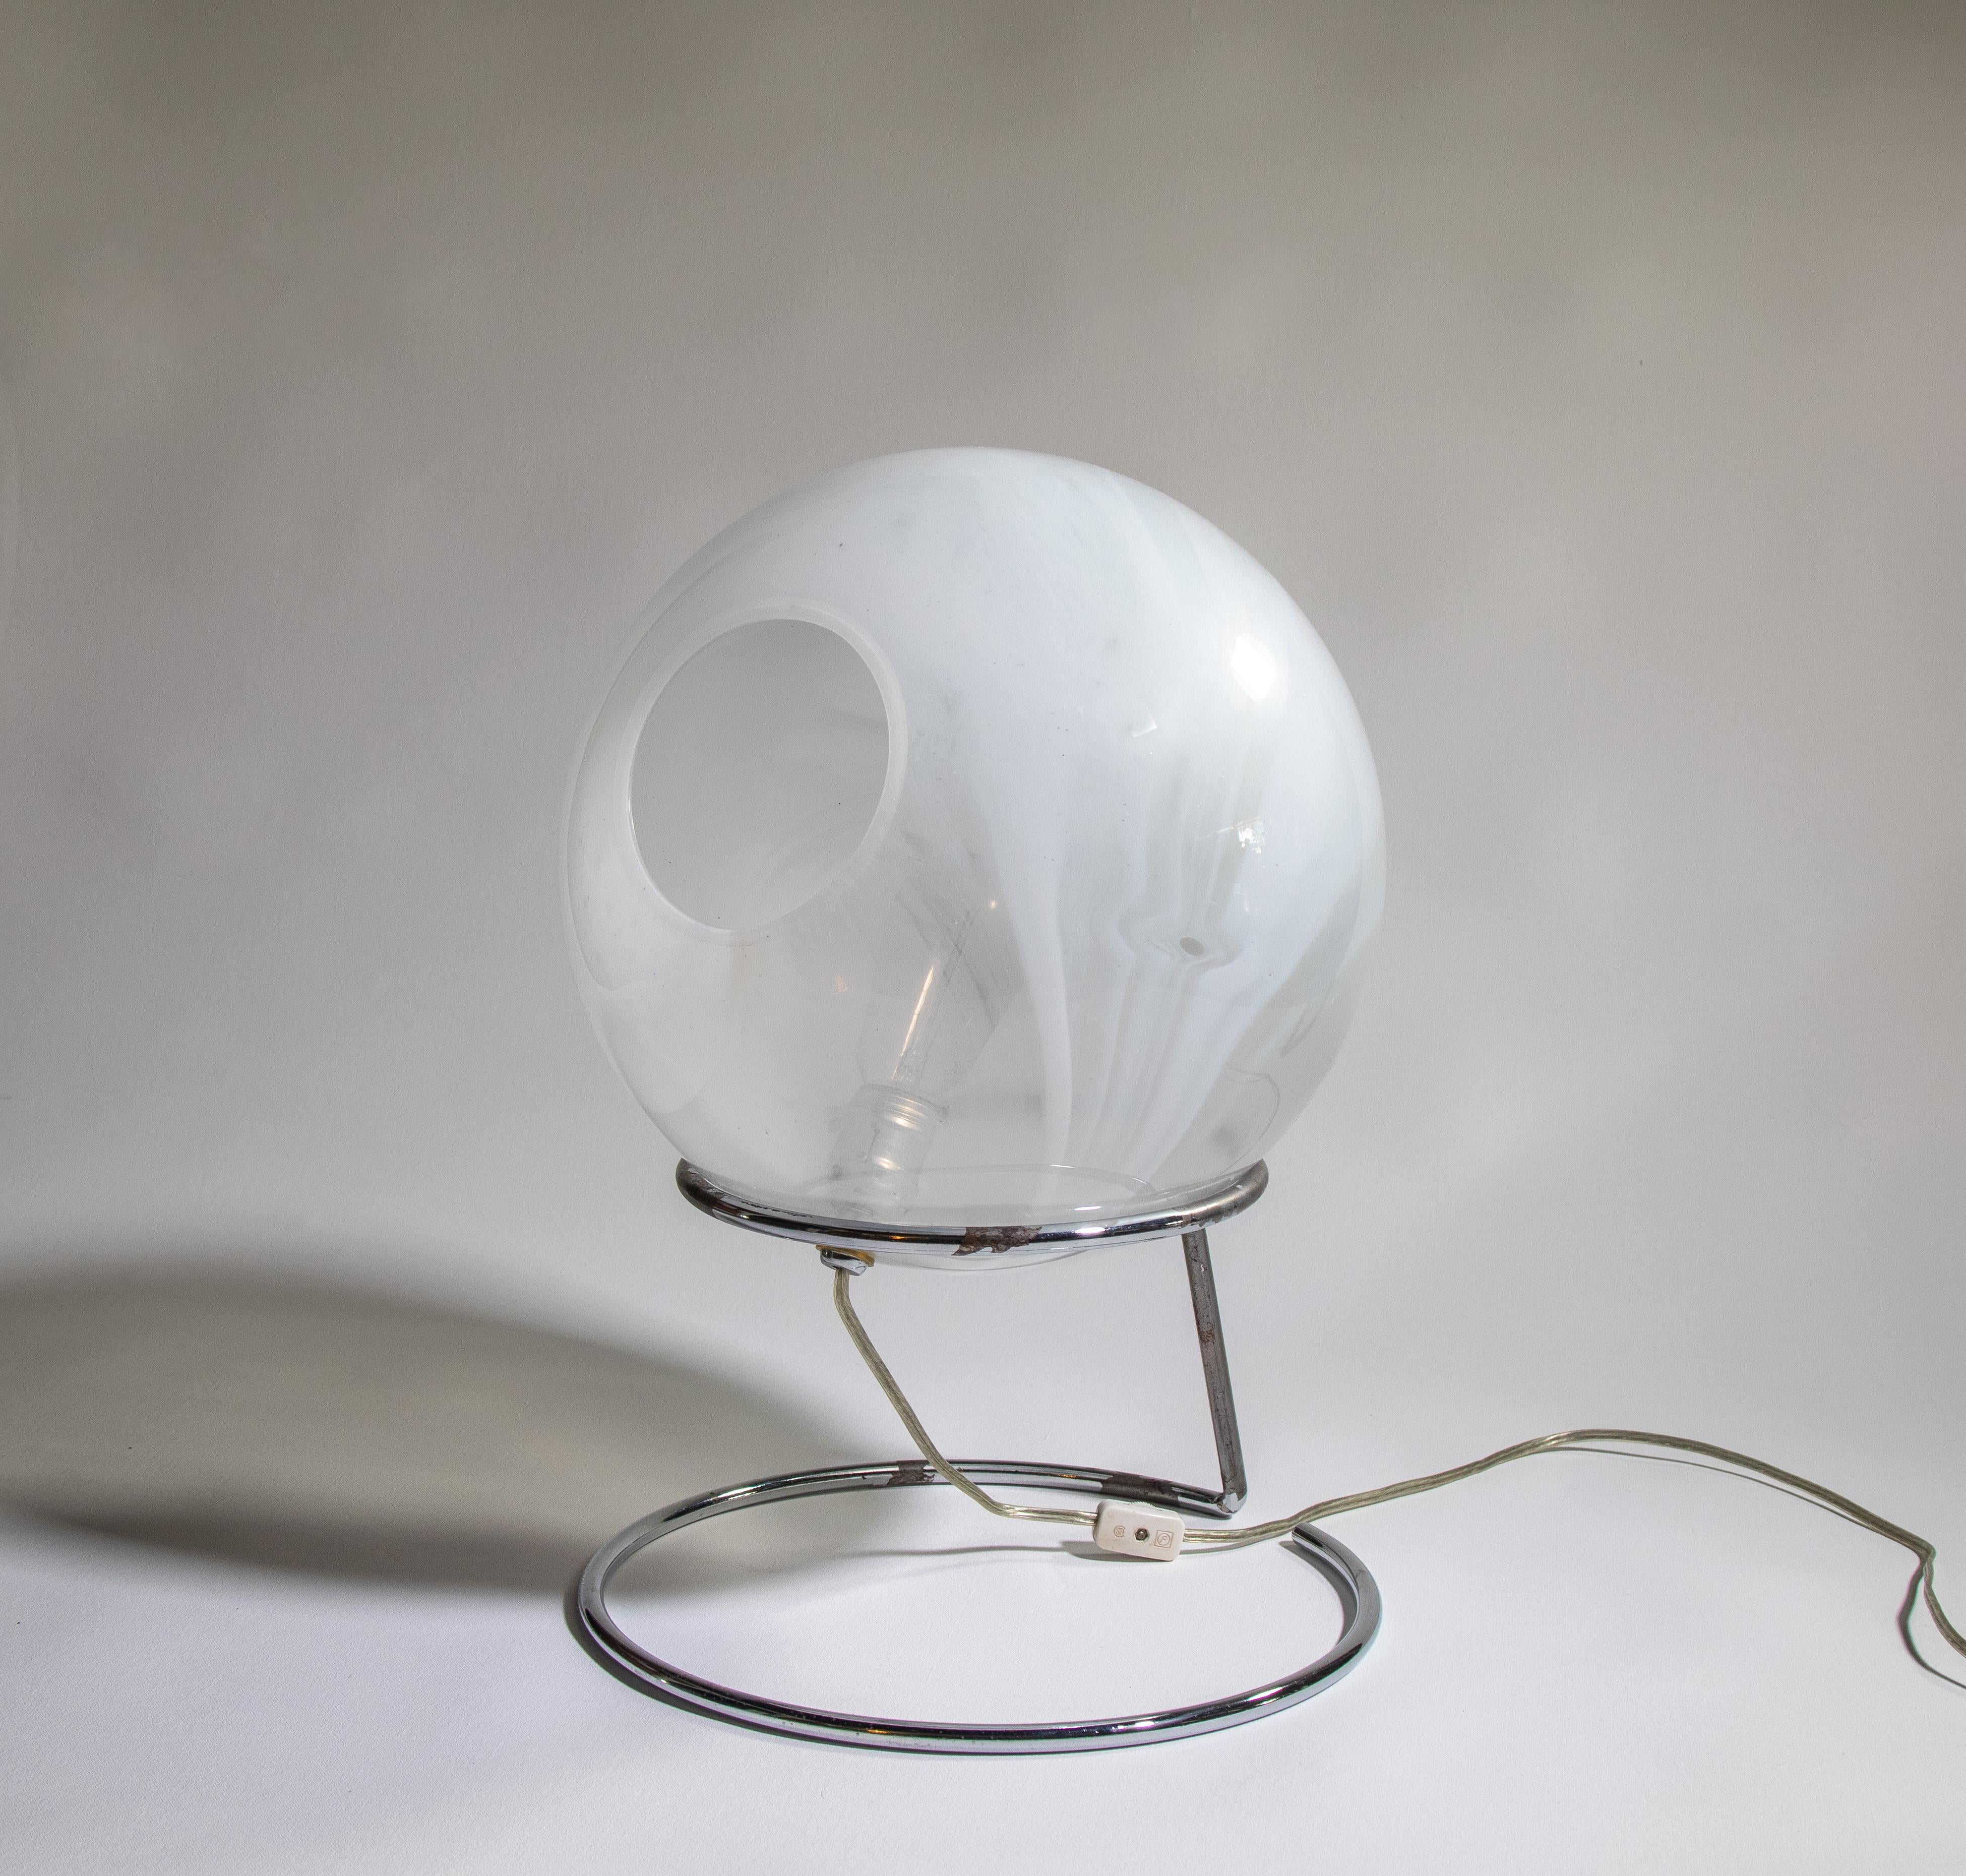 1960s Murano Style Eyeball Orb Lamp Chrome and Art Glass after Gino Sarfatti For Sale 3